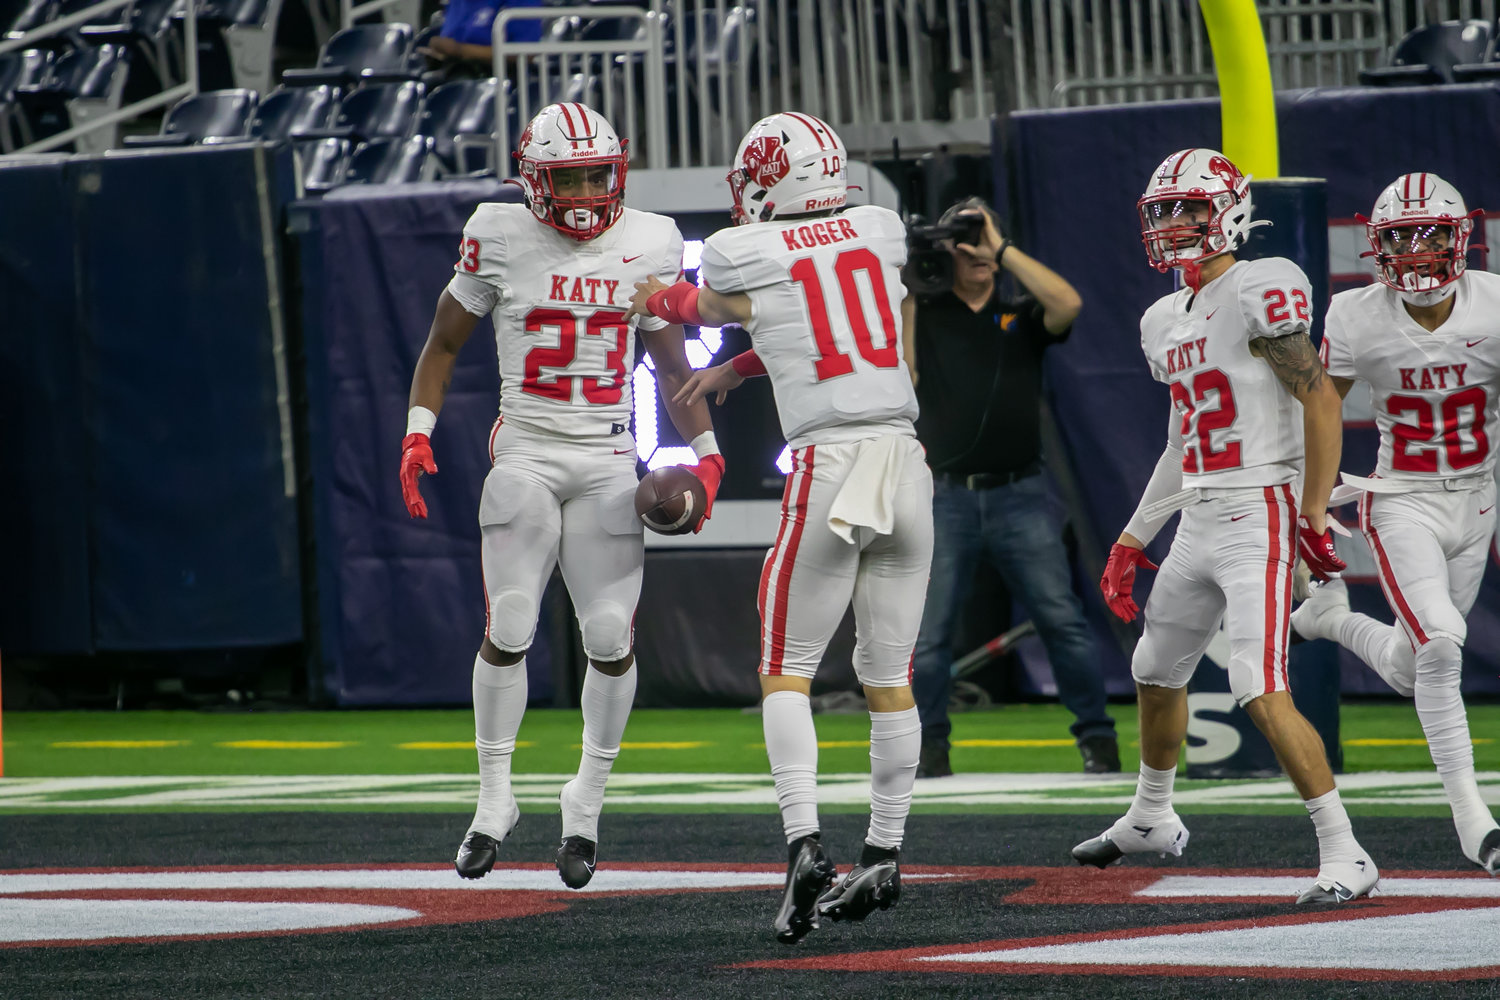 Caleb Koger and Seth Davis celebrate after a touchown during Friday's Class 6A-Division II Region III Final between Katy and C.E. King at NRG Stadium.